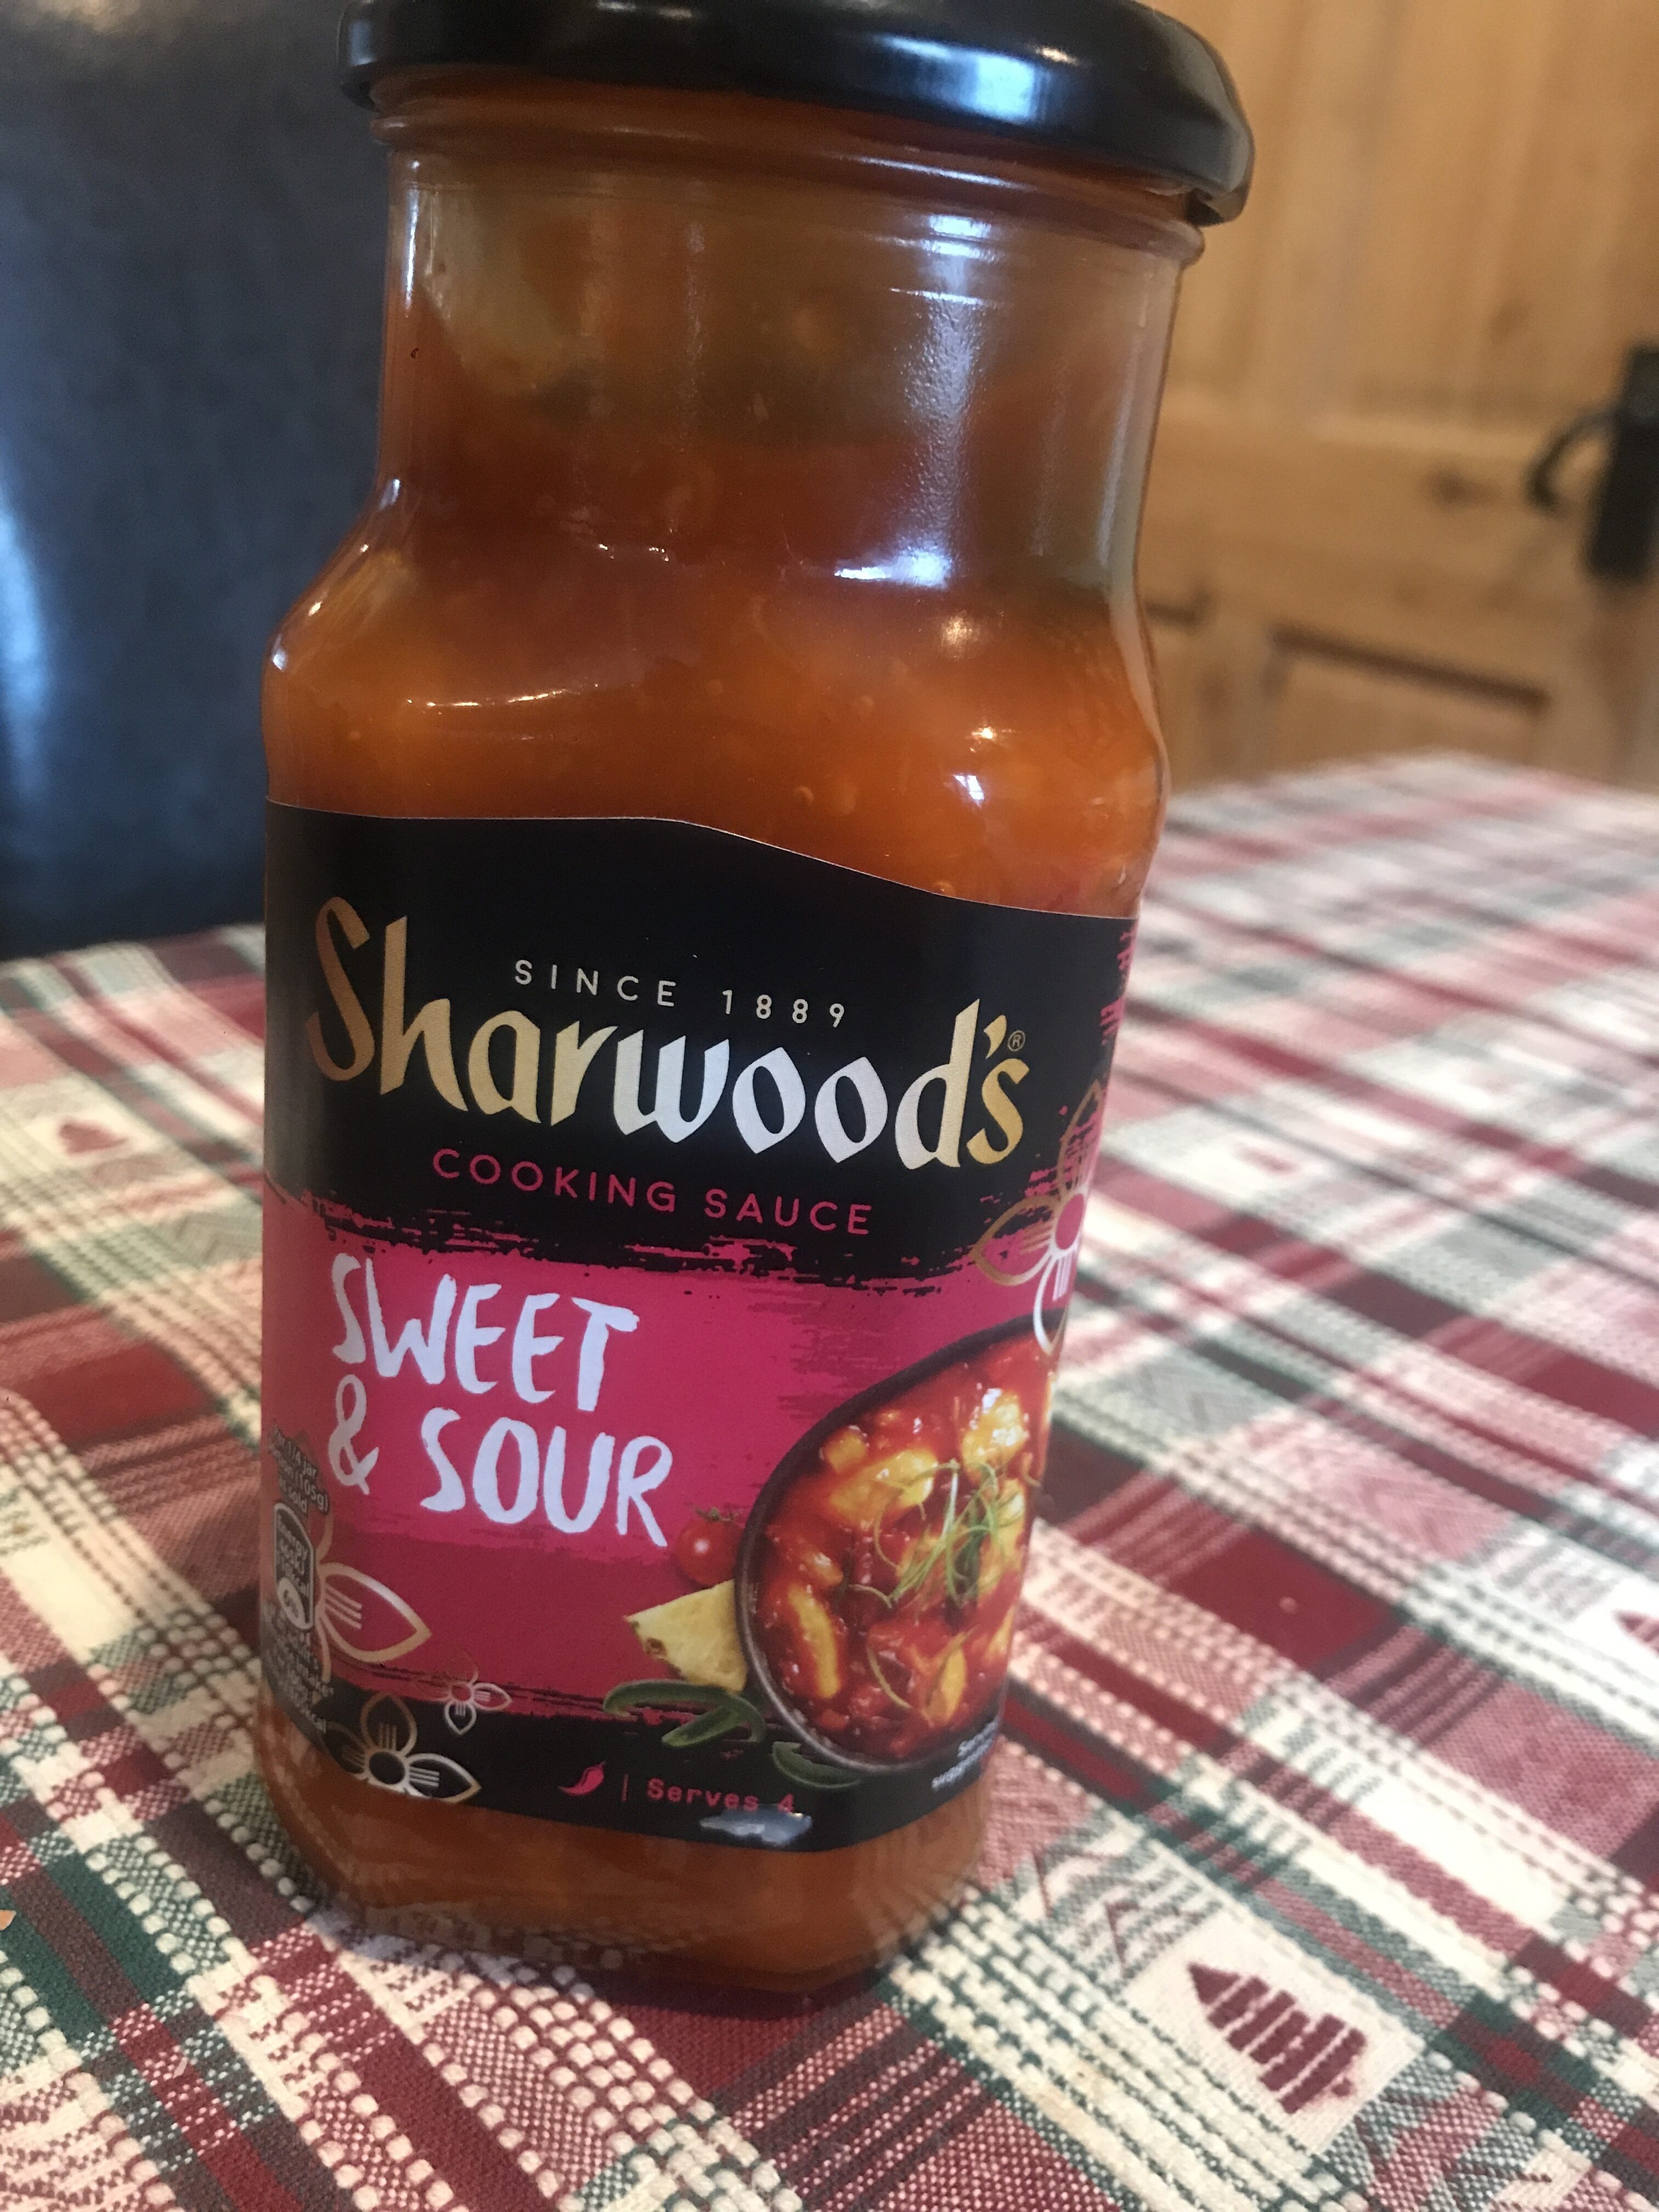 Sharwood’s Sweet & Sour - Product